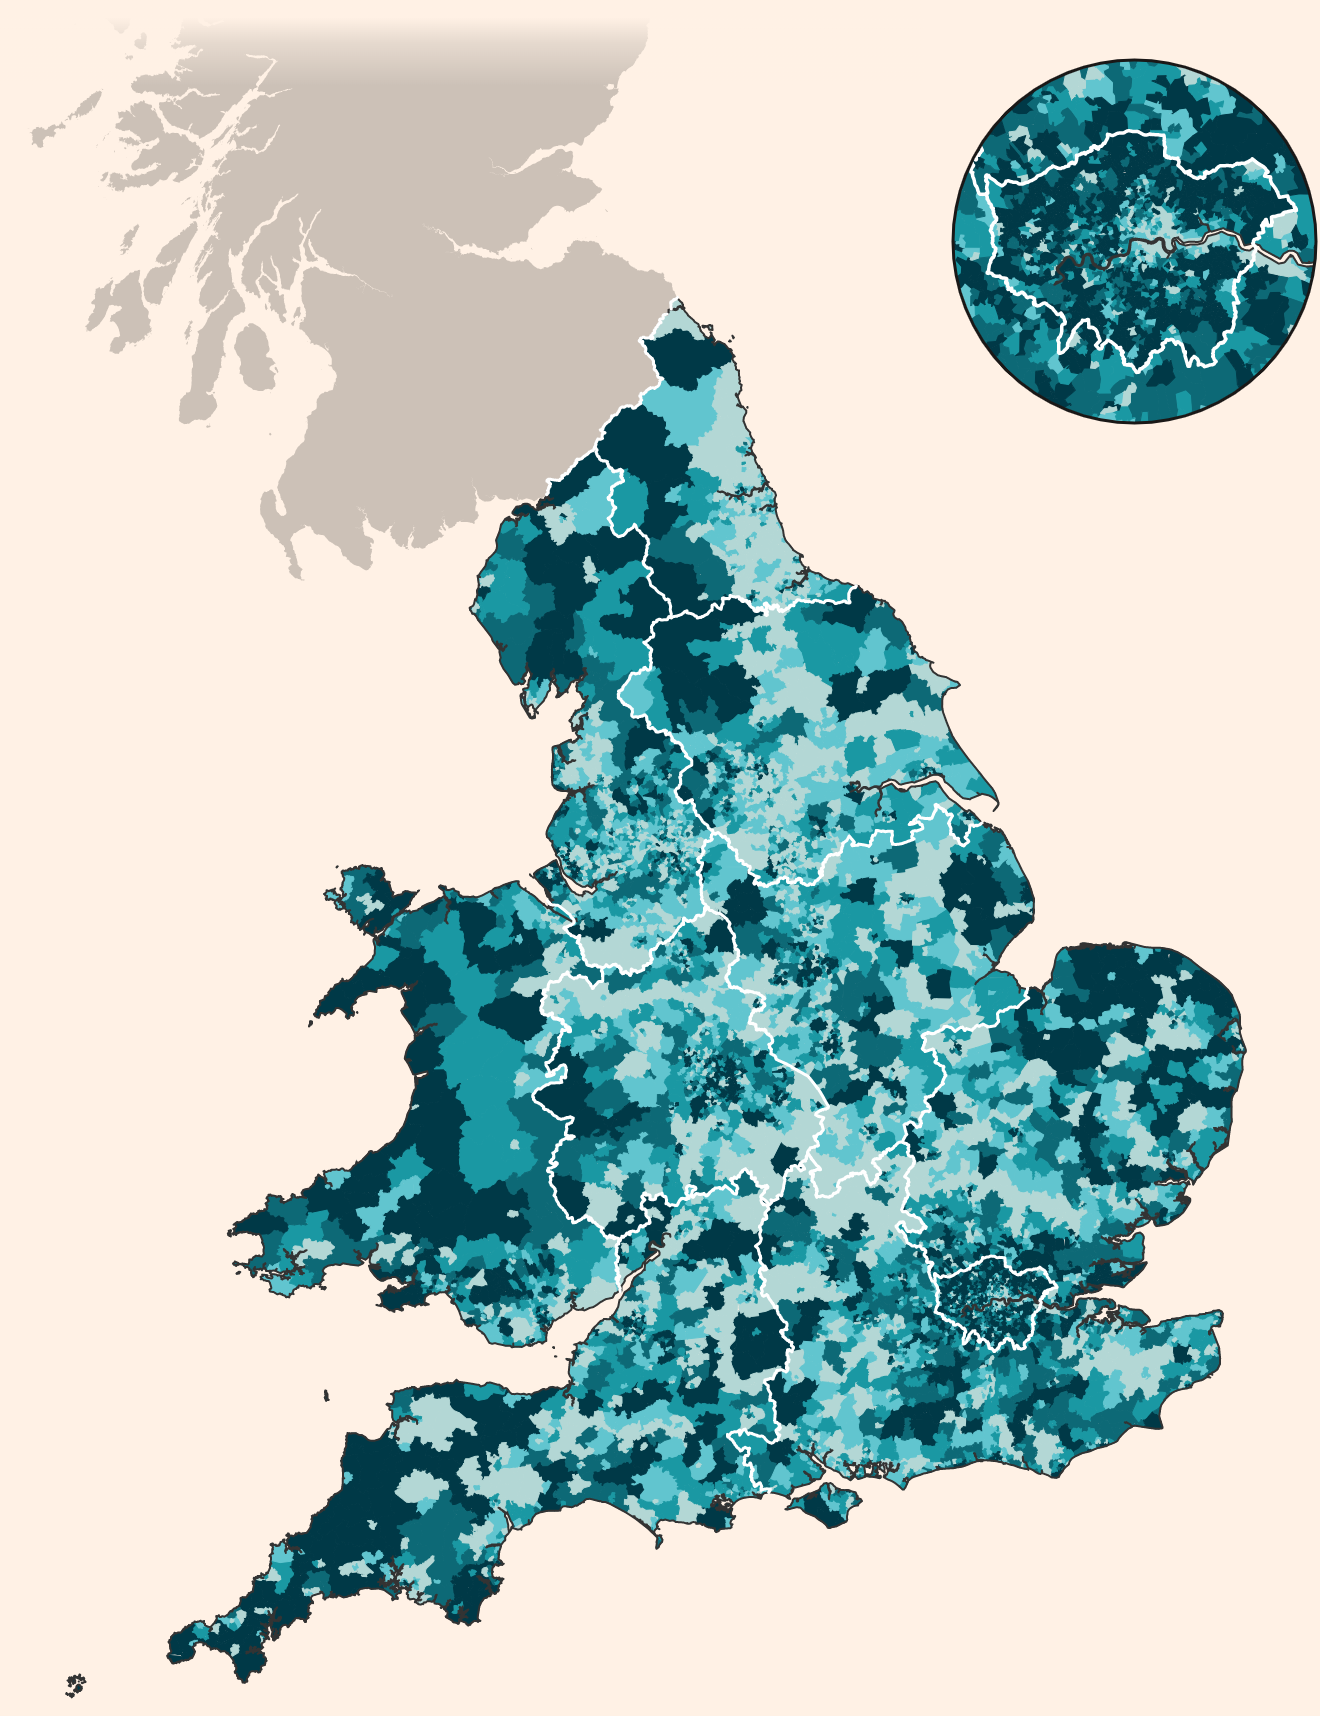 Map of England and Wales showing energy saving potential in different areas